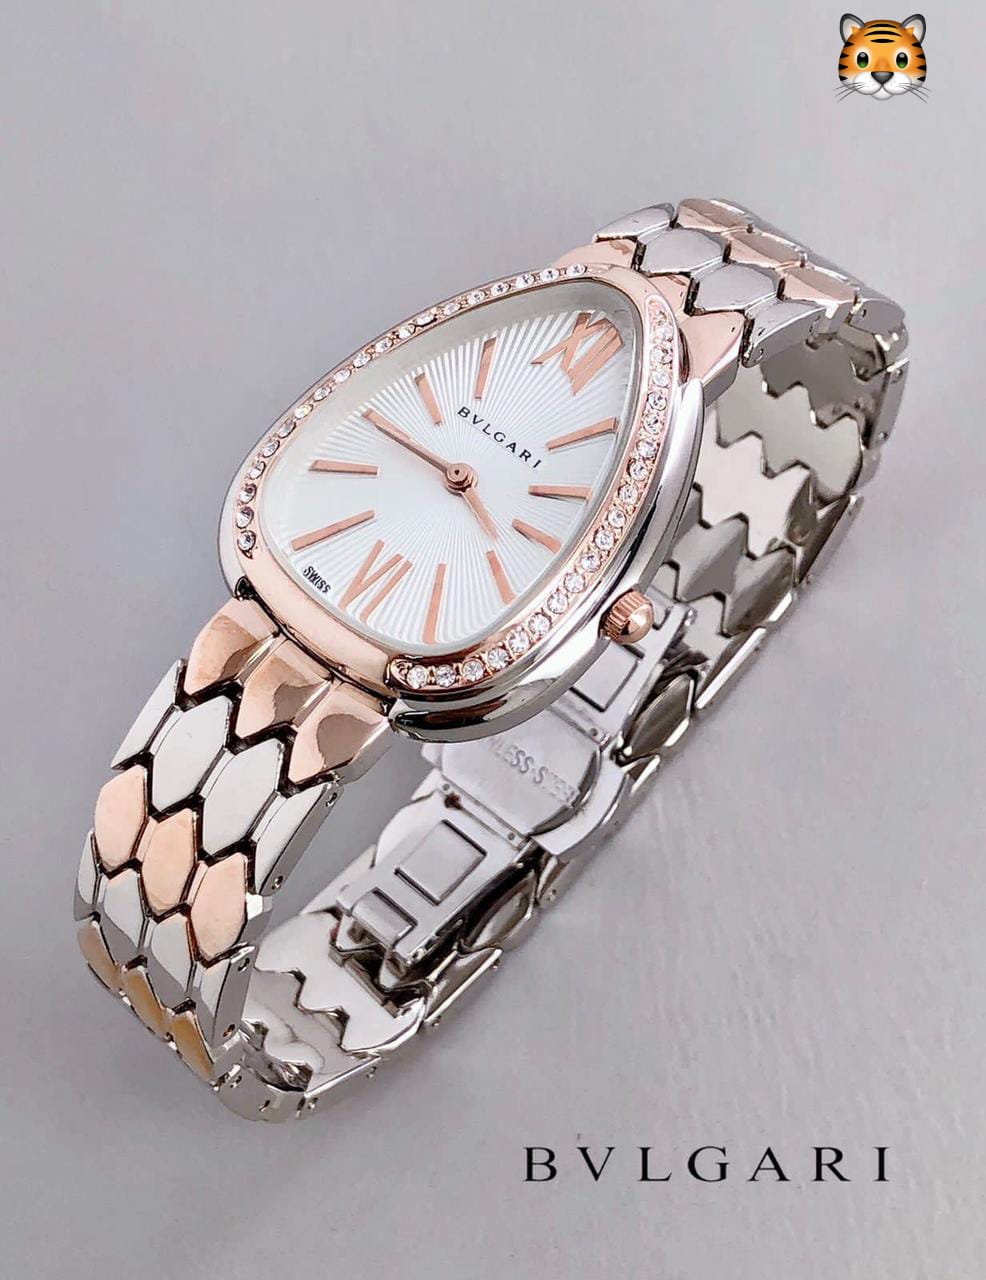 Bvlgari Branded Analog Watch With Silver Metal Case & Strap Watch With White Dial Designer Rose Gold Multicolor Strap Watch For Girl Or Woman-Best Gift Date Watch-BV-103456